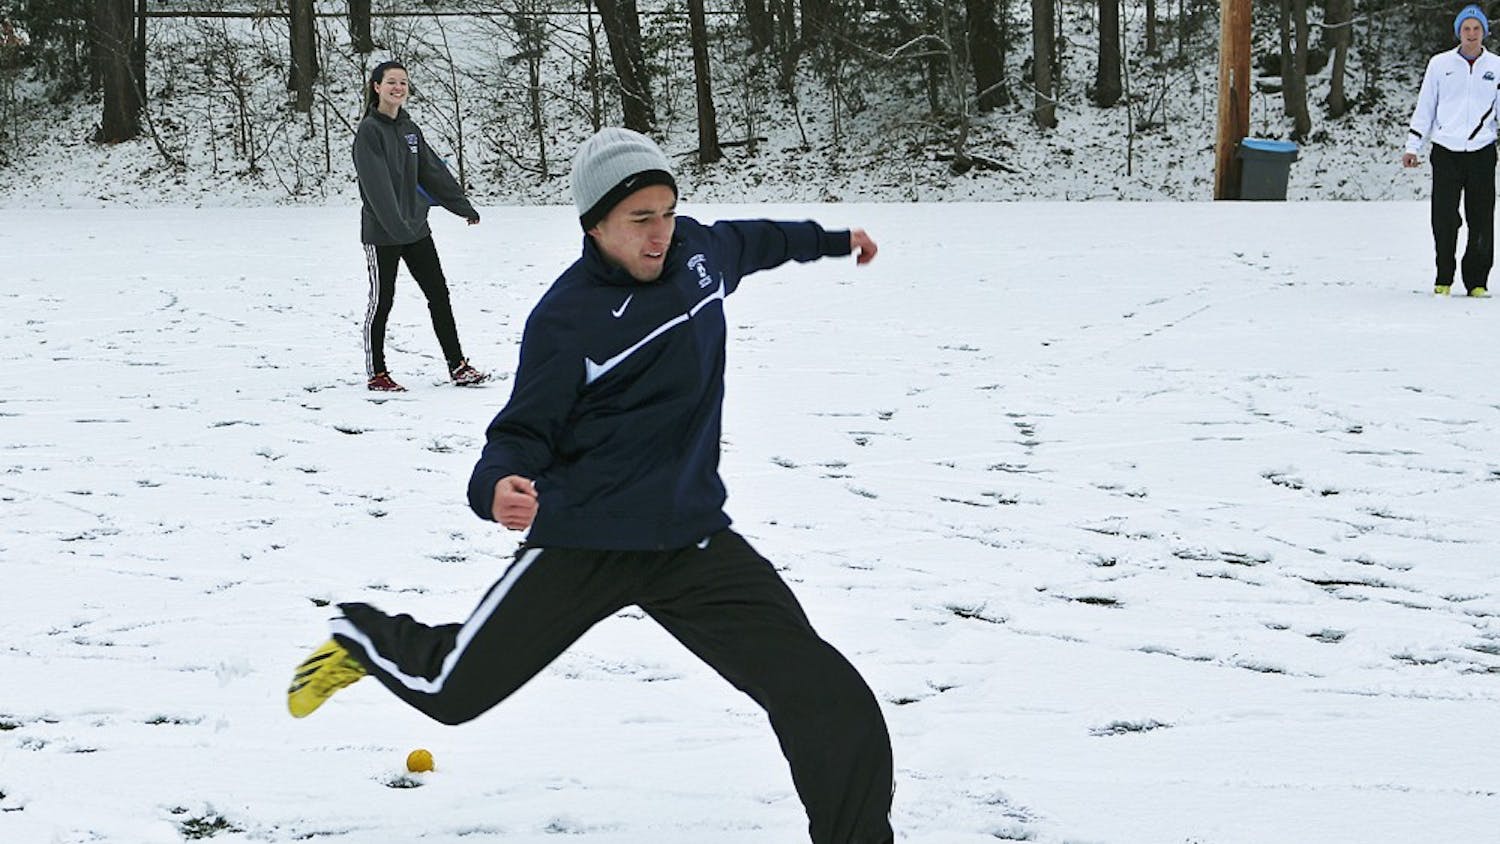 Freshmen Trevor Doane (right) and Megan NcNeill play soccer in the snow on Ehringhaus fields Tuesday. Classes were canceled at 2:30 p.m.